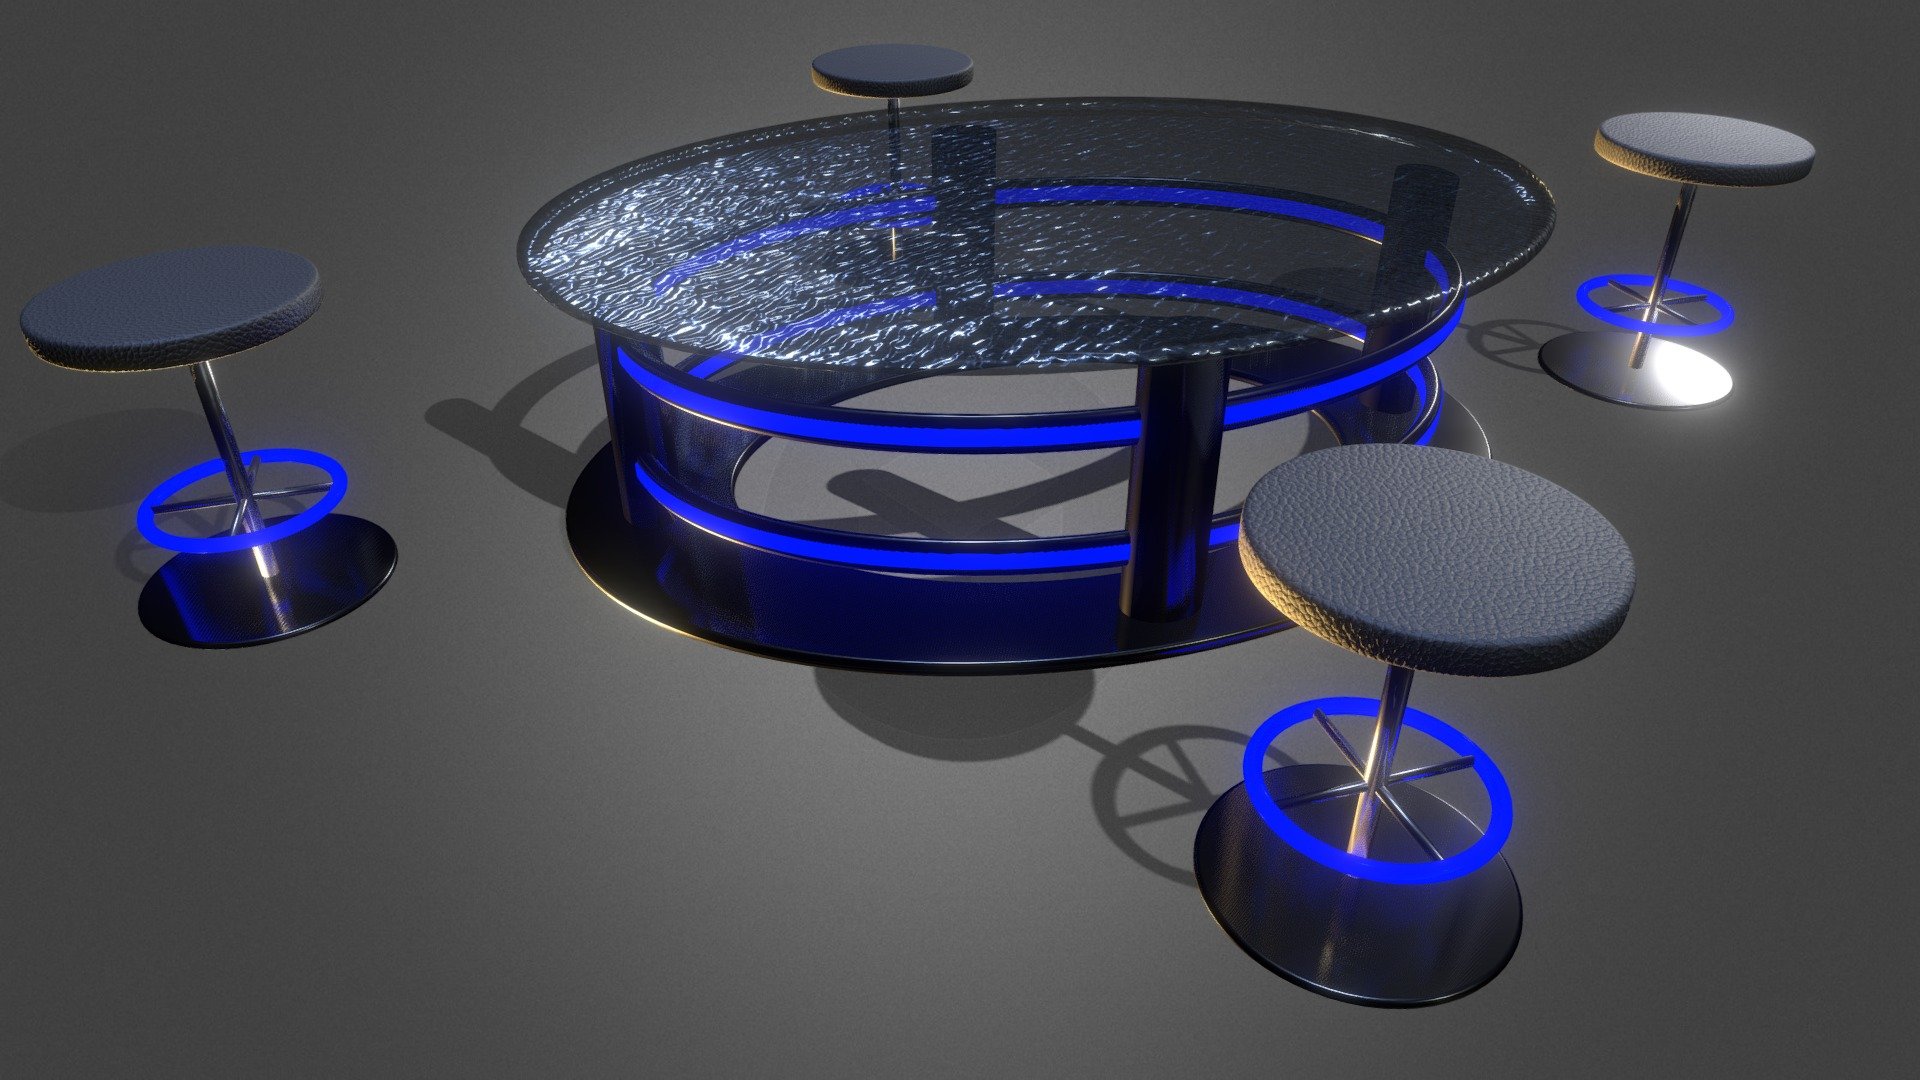 Bar Set 3D Model of the Lights series, Blue model, consisting of bright table with wavy glass and 4 stools.

Table Dimension: 48cm (height) x 117cm (depth) x 164cm (length)

Stools Dimension: 46.6cm (height) x 36cm (depth) x 36cm (length)

The model already contains the hotspots compatible with Spatial.io that allow the avatar to sit 3d model